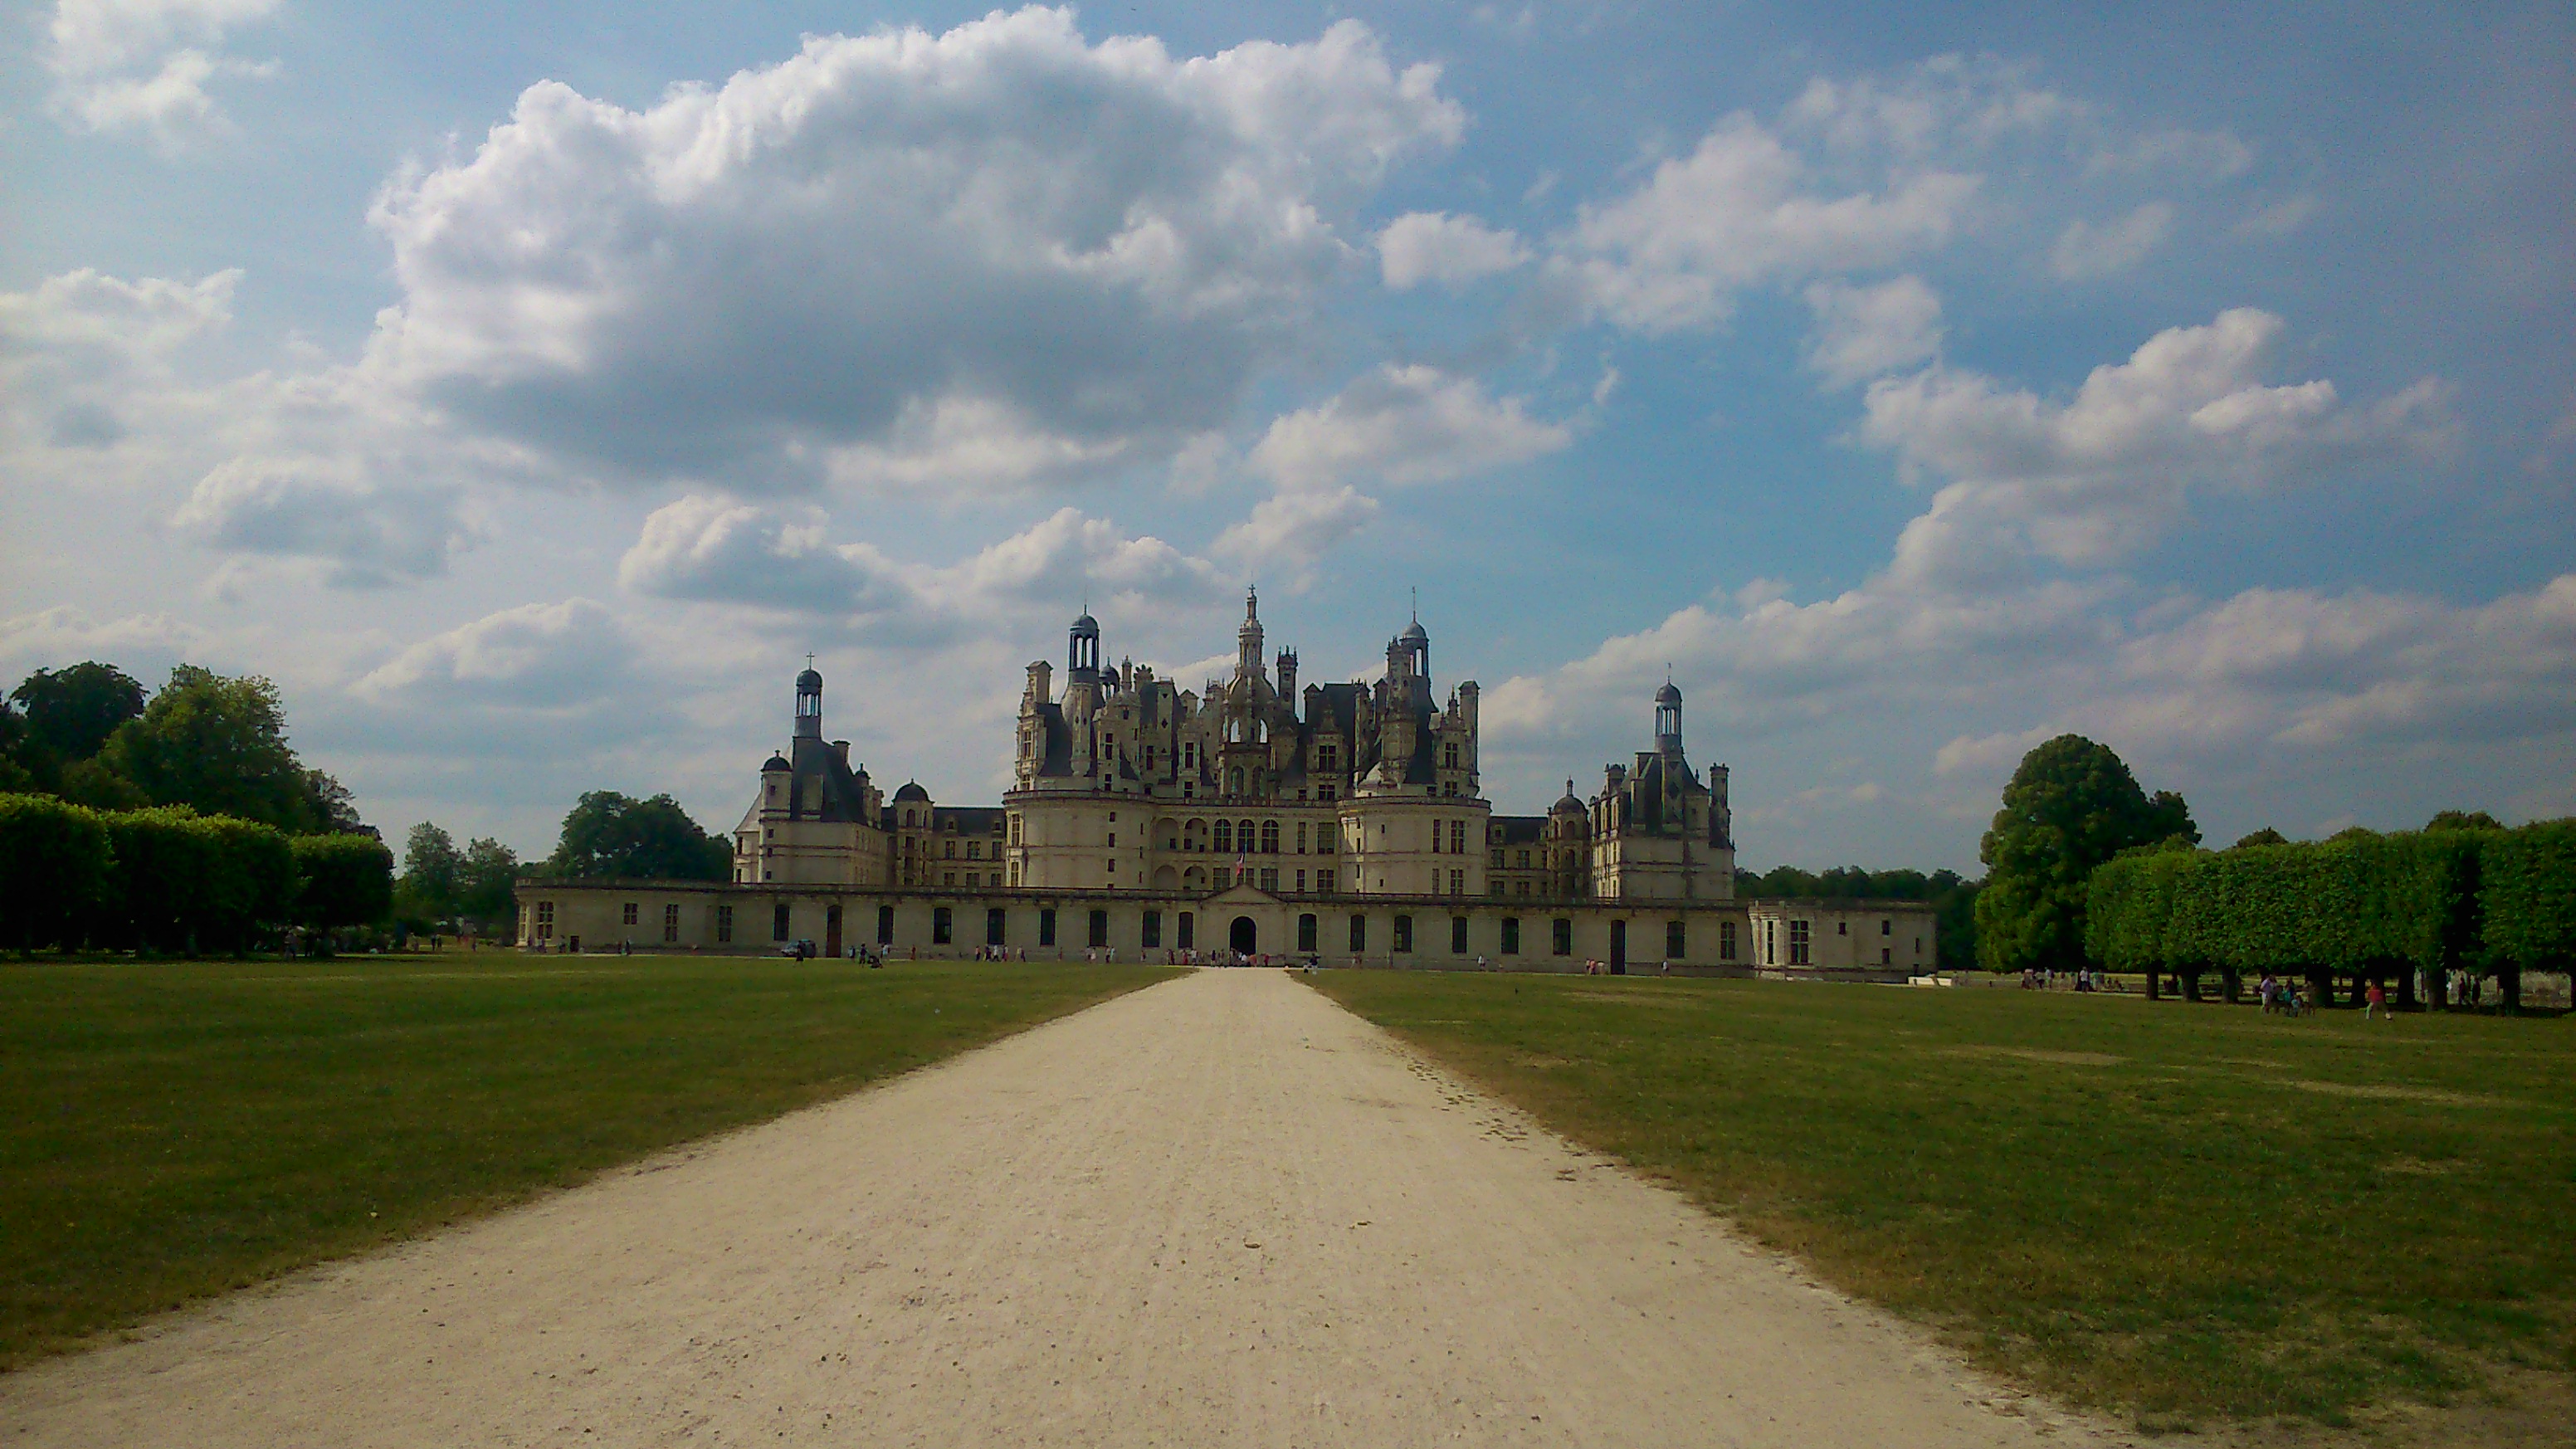 The Chateau de Chambord, near Blois is one of the most famous castles in France